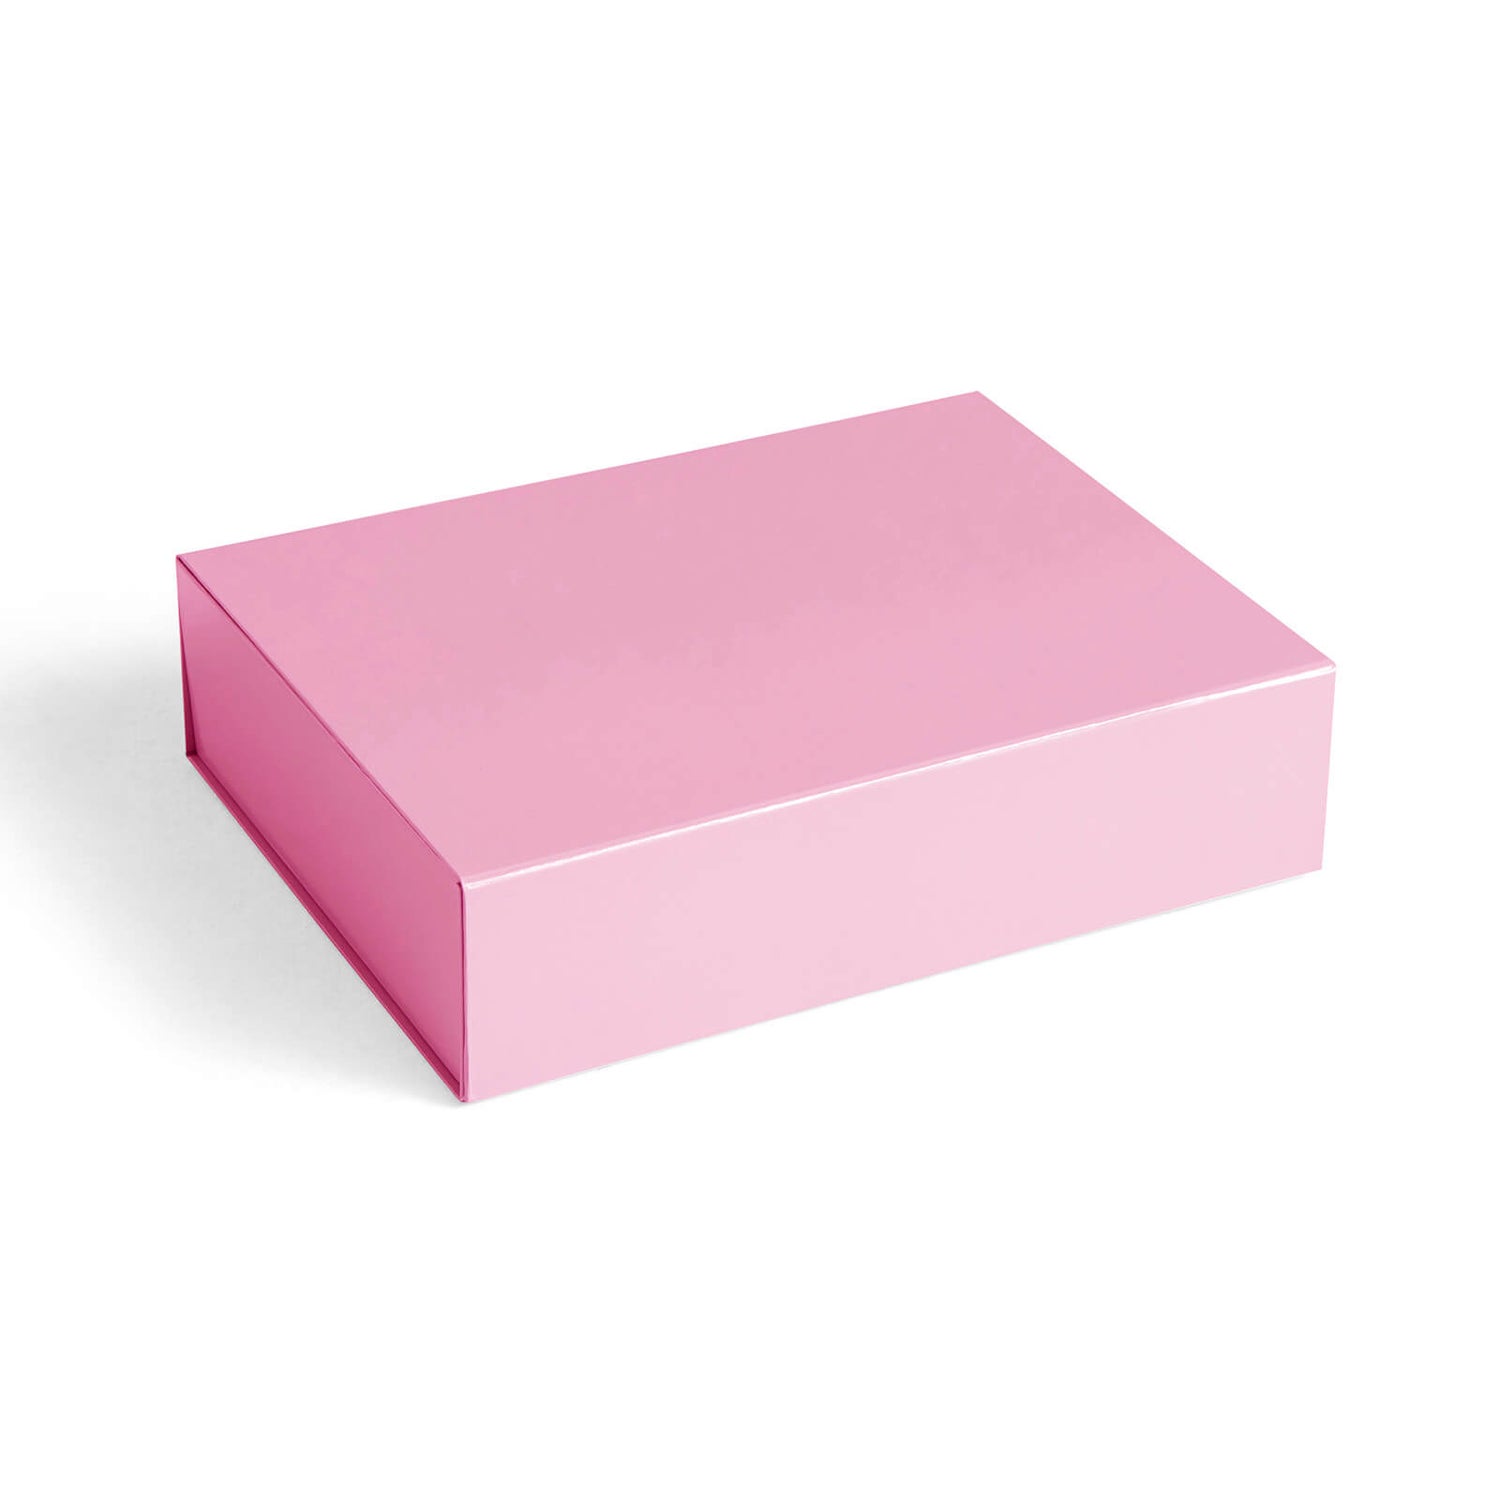 HAY Colour Storage - Small - Light Pink